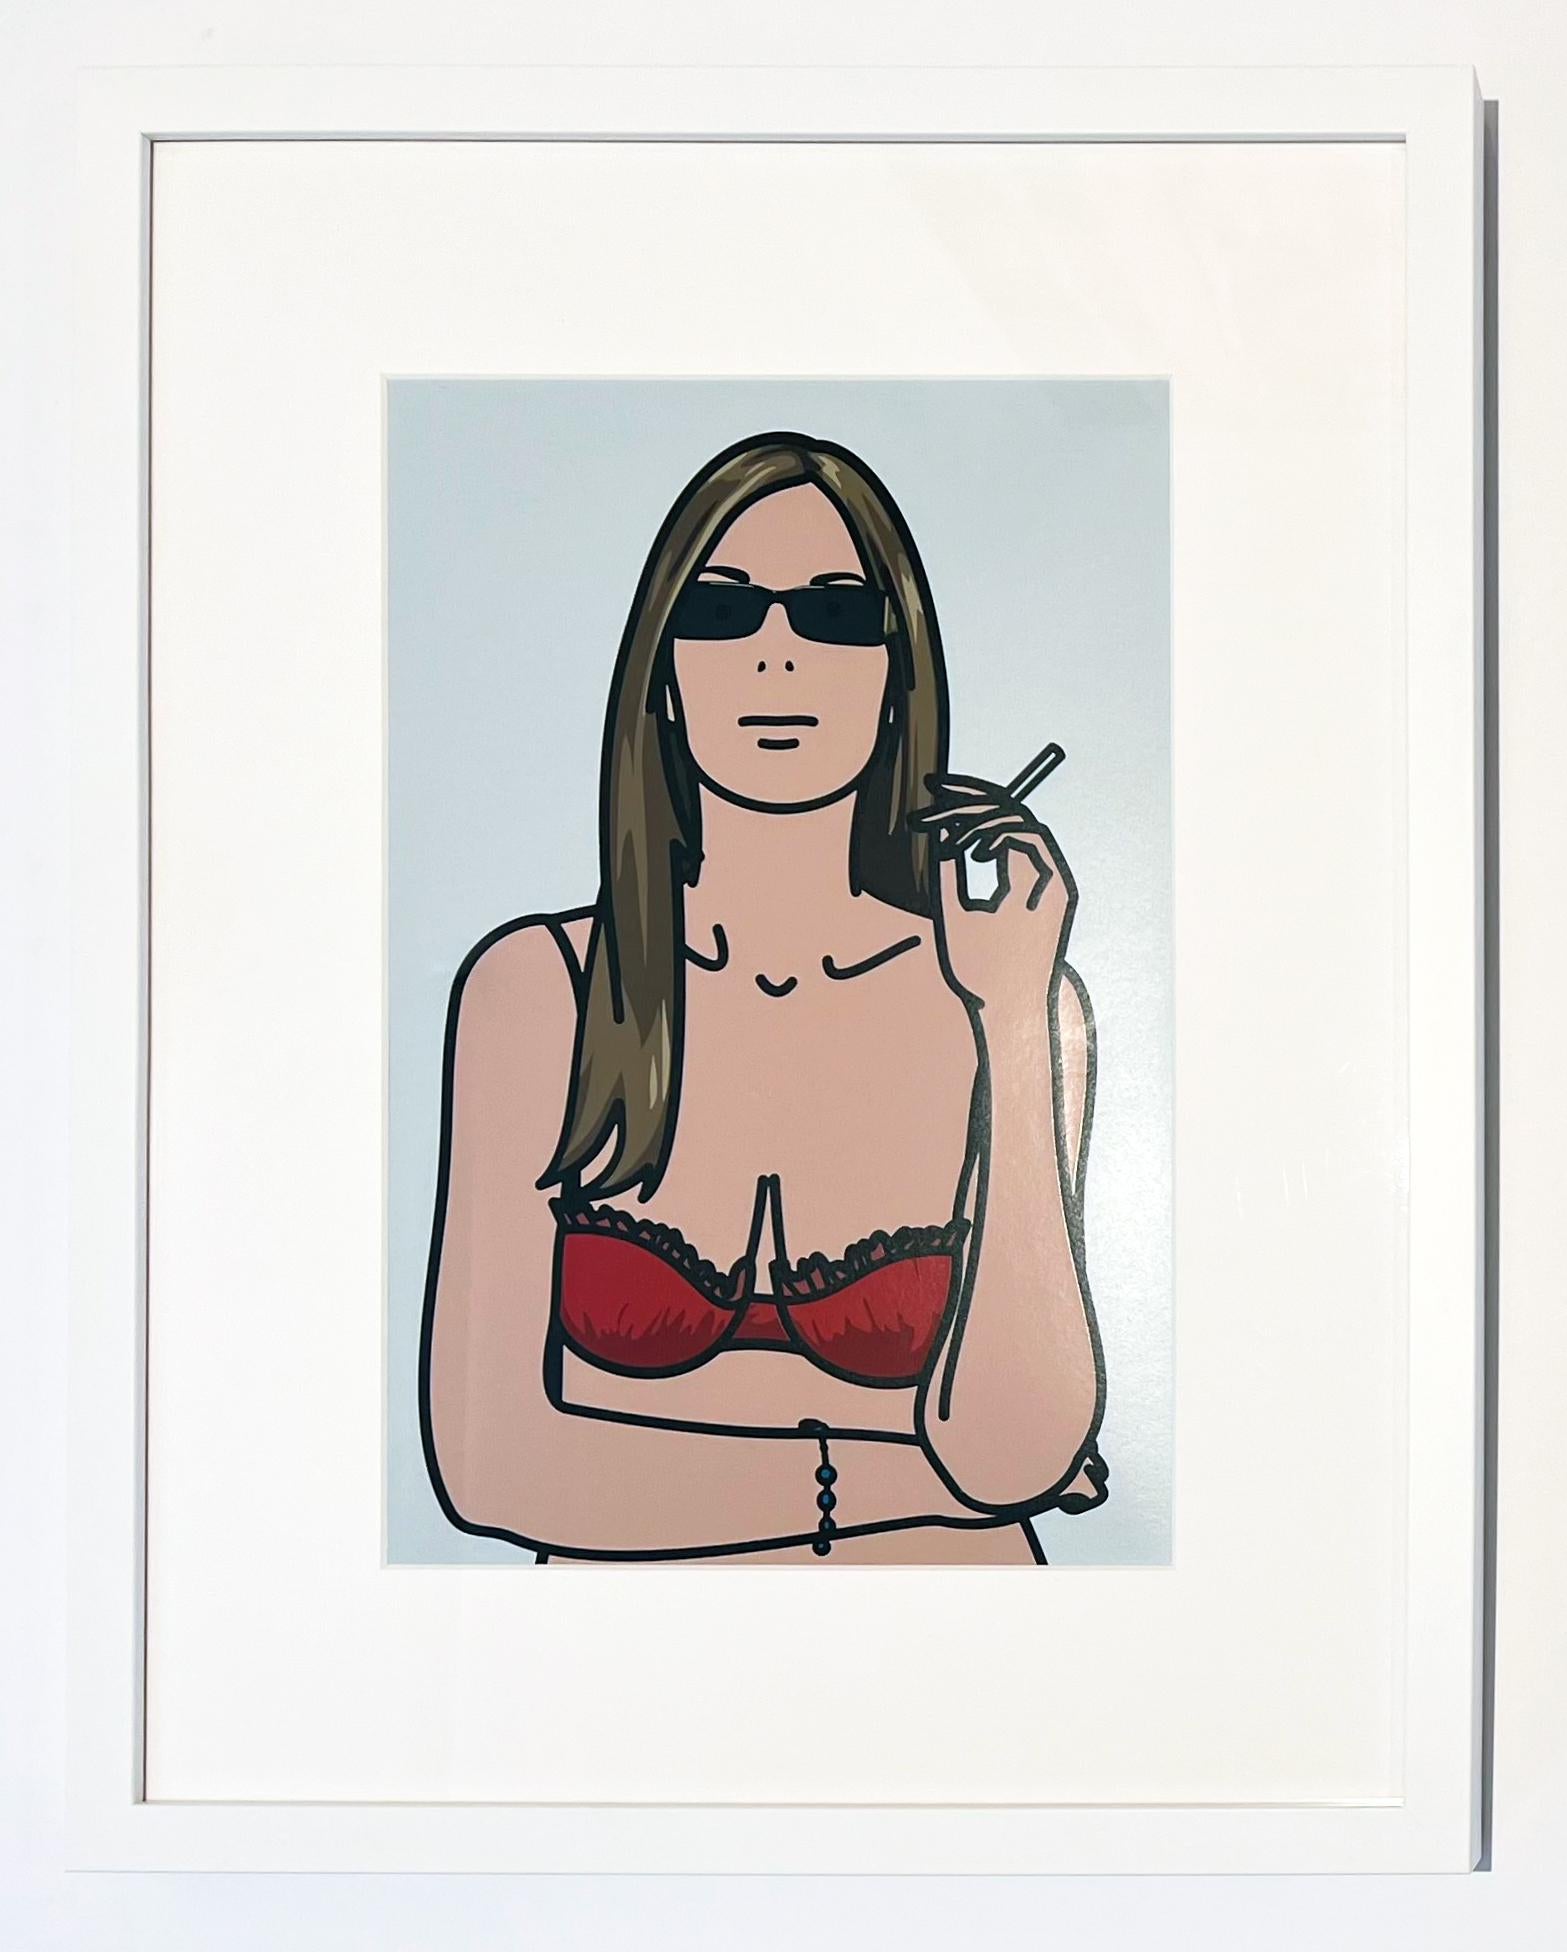 Ruth Smoking 4, from 26 Portraits - Print by Julian Opie